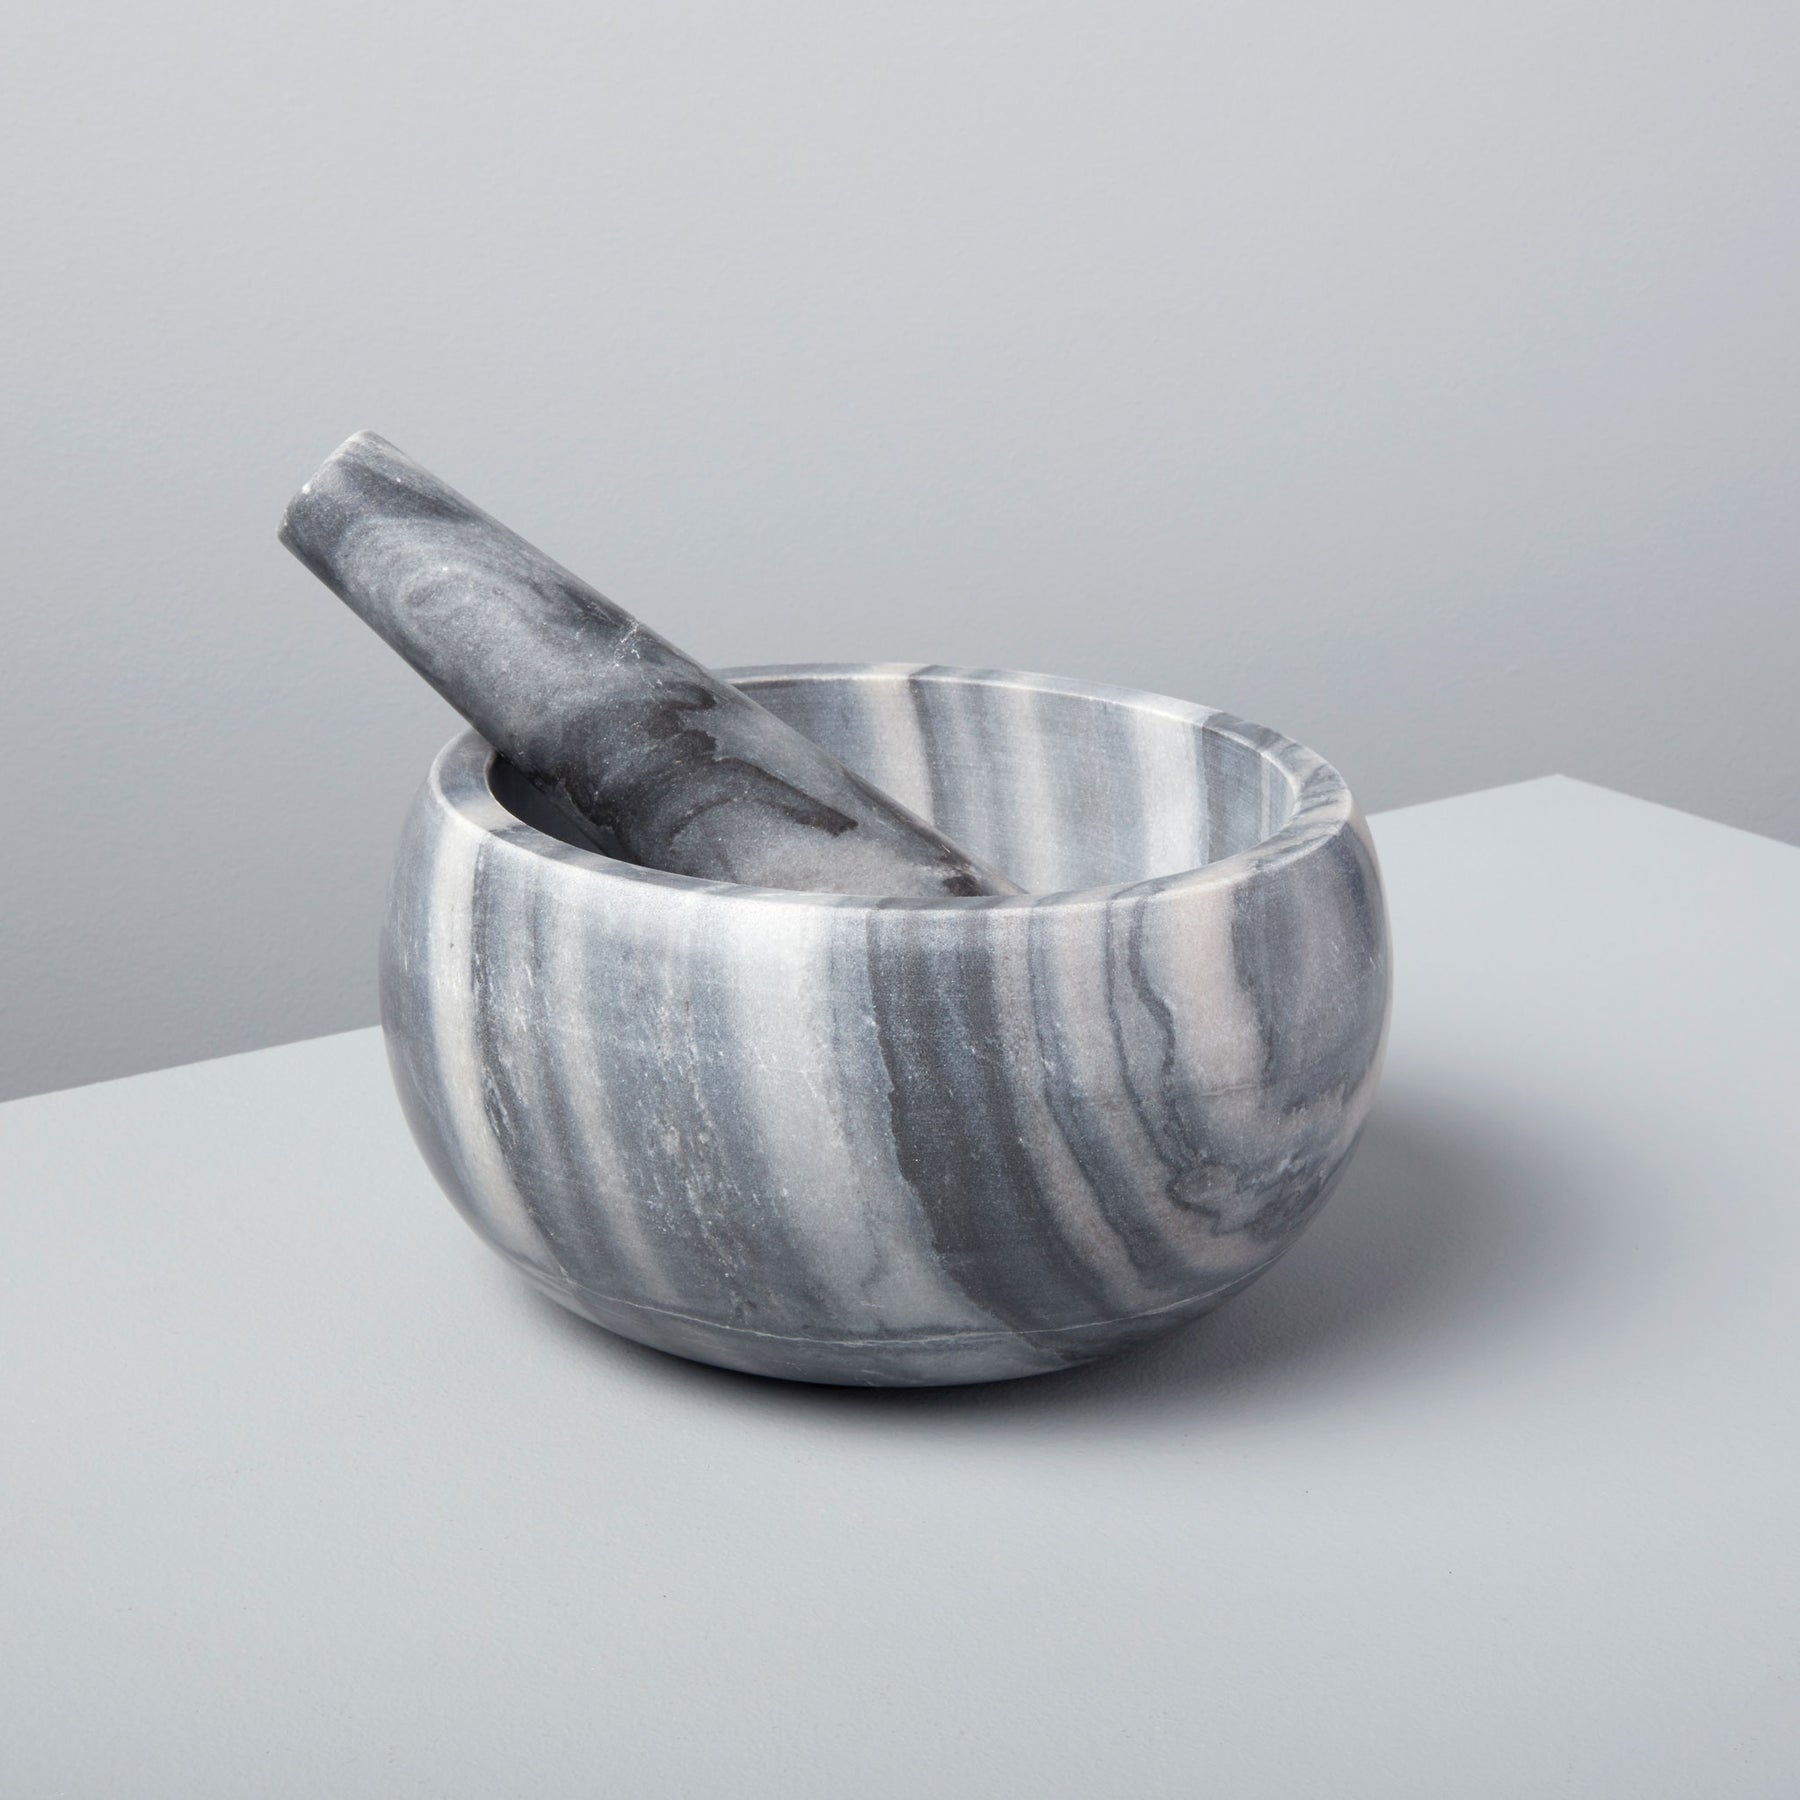 Be Home Grey Marble Mortar & Pestle